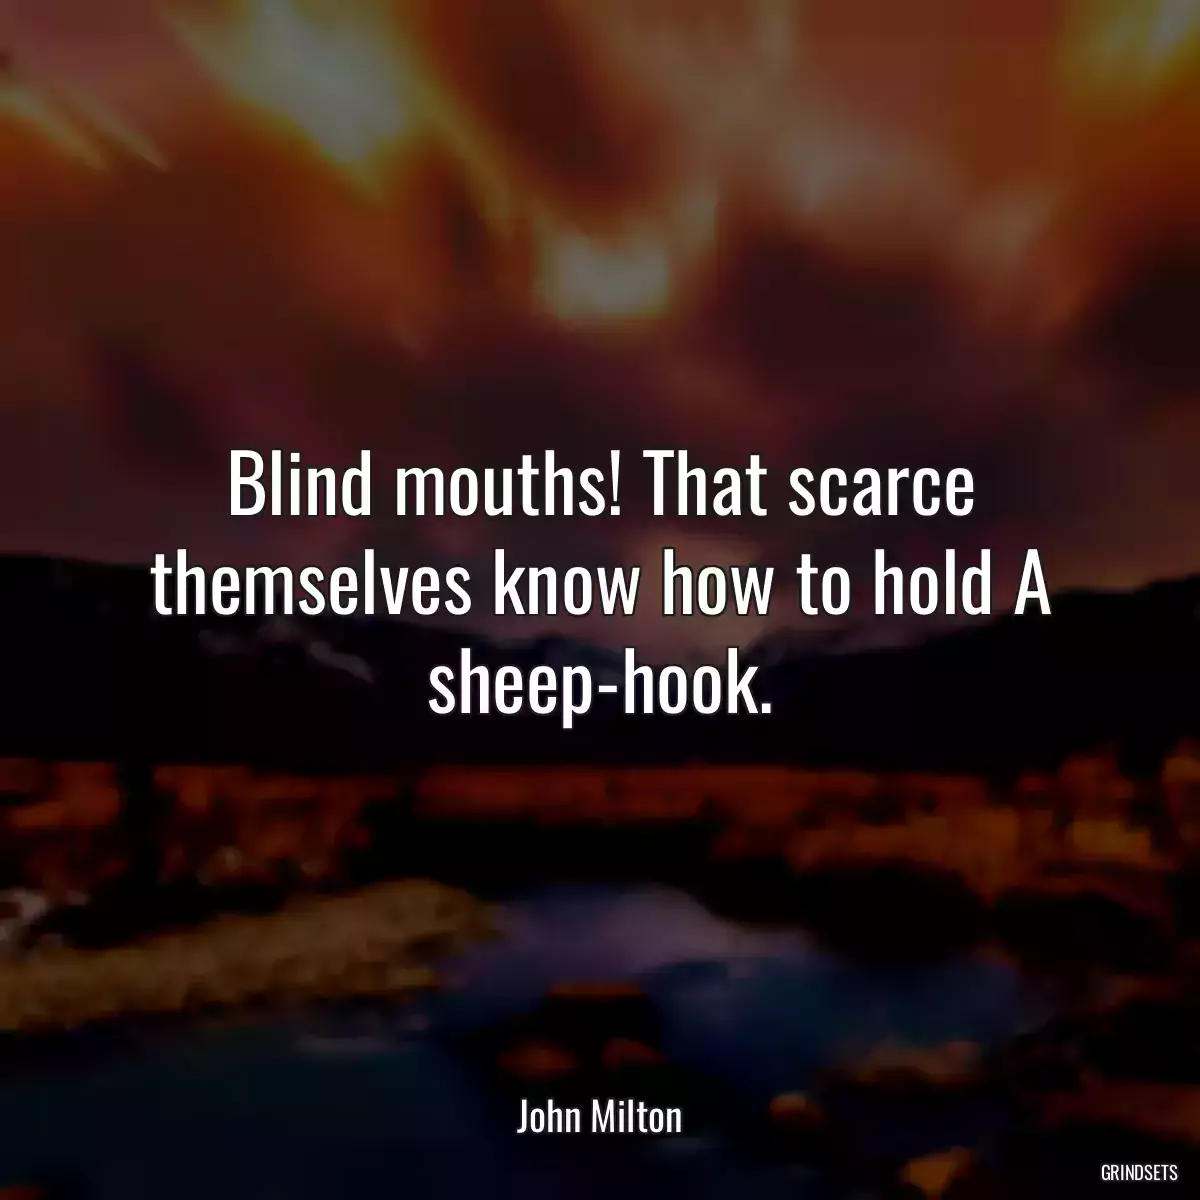 Blind mouths! That scarce themselves know how to hold A sheep-hook.